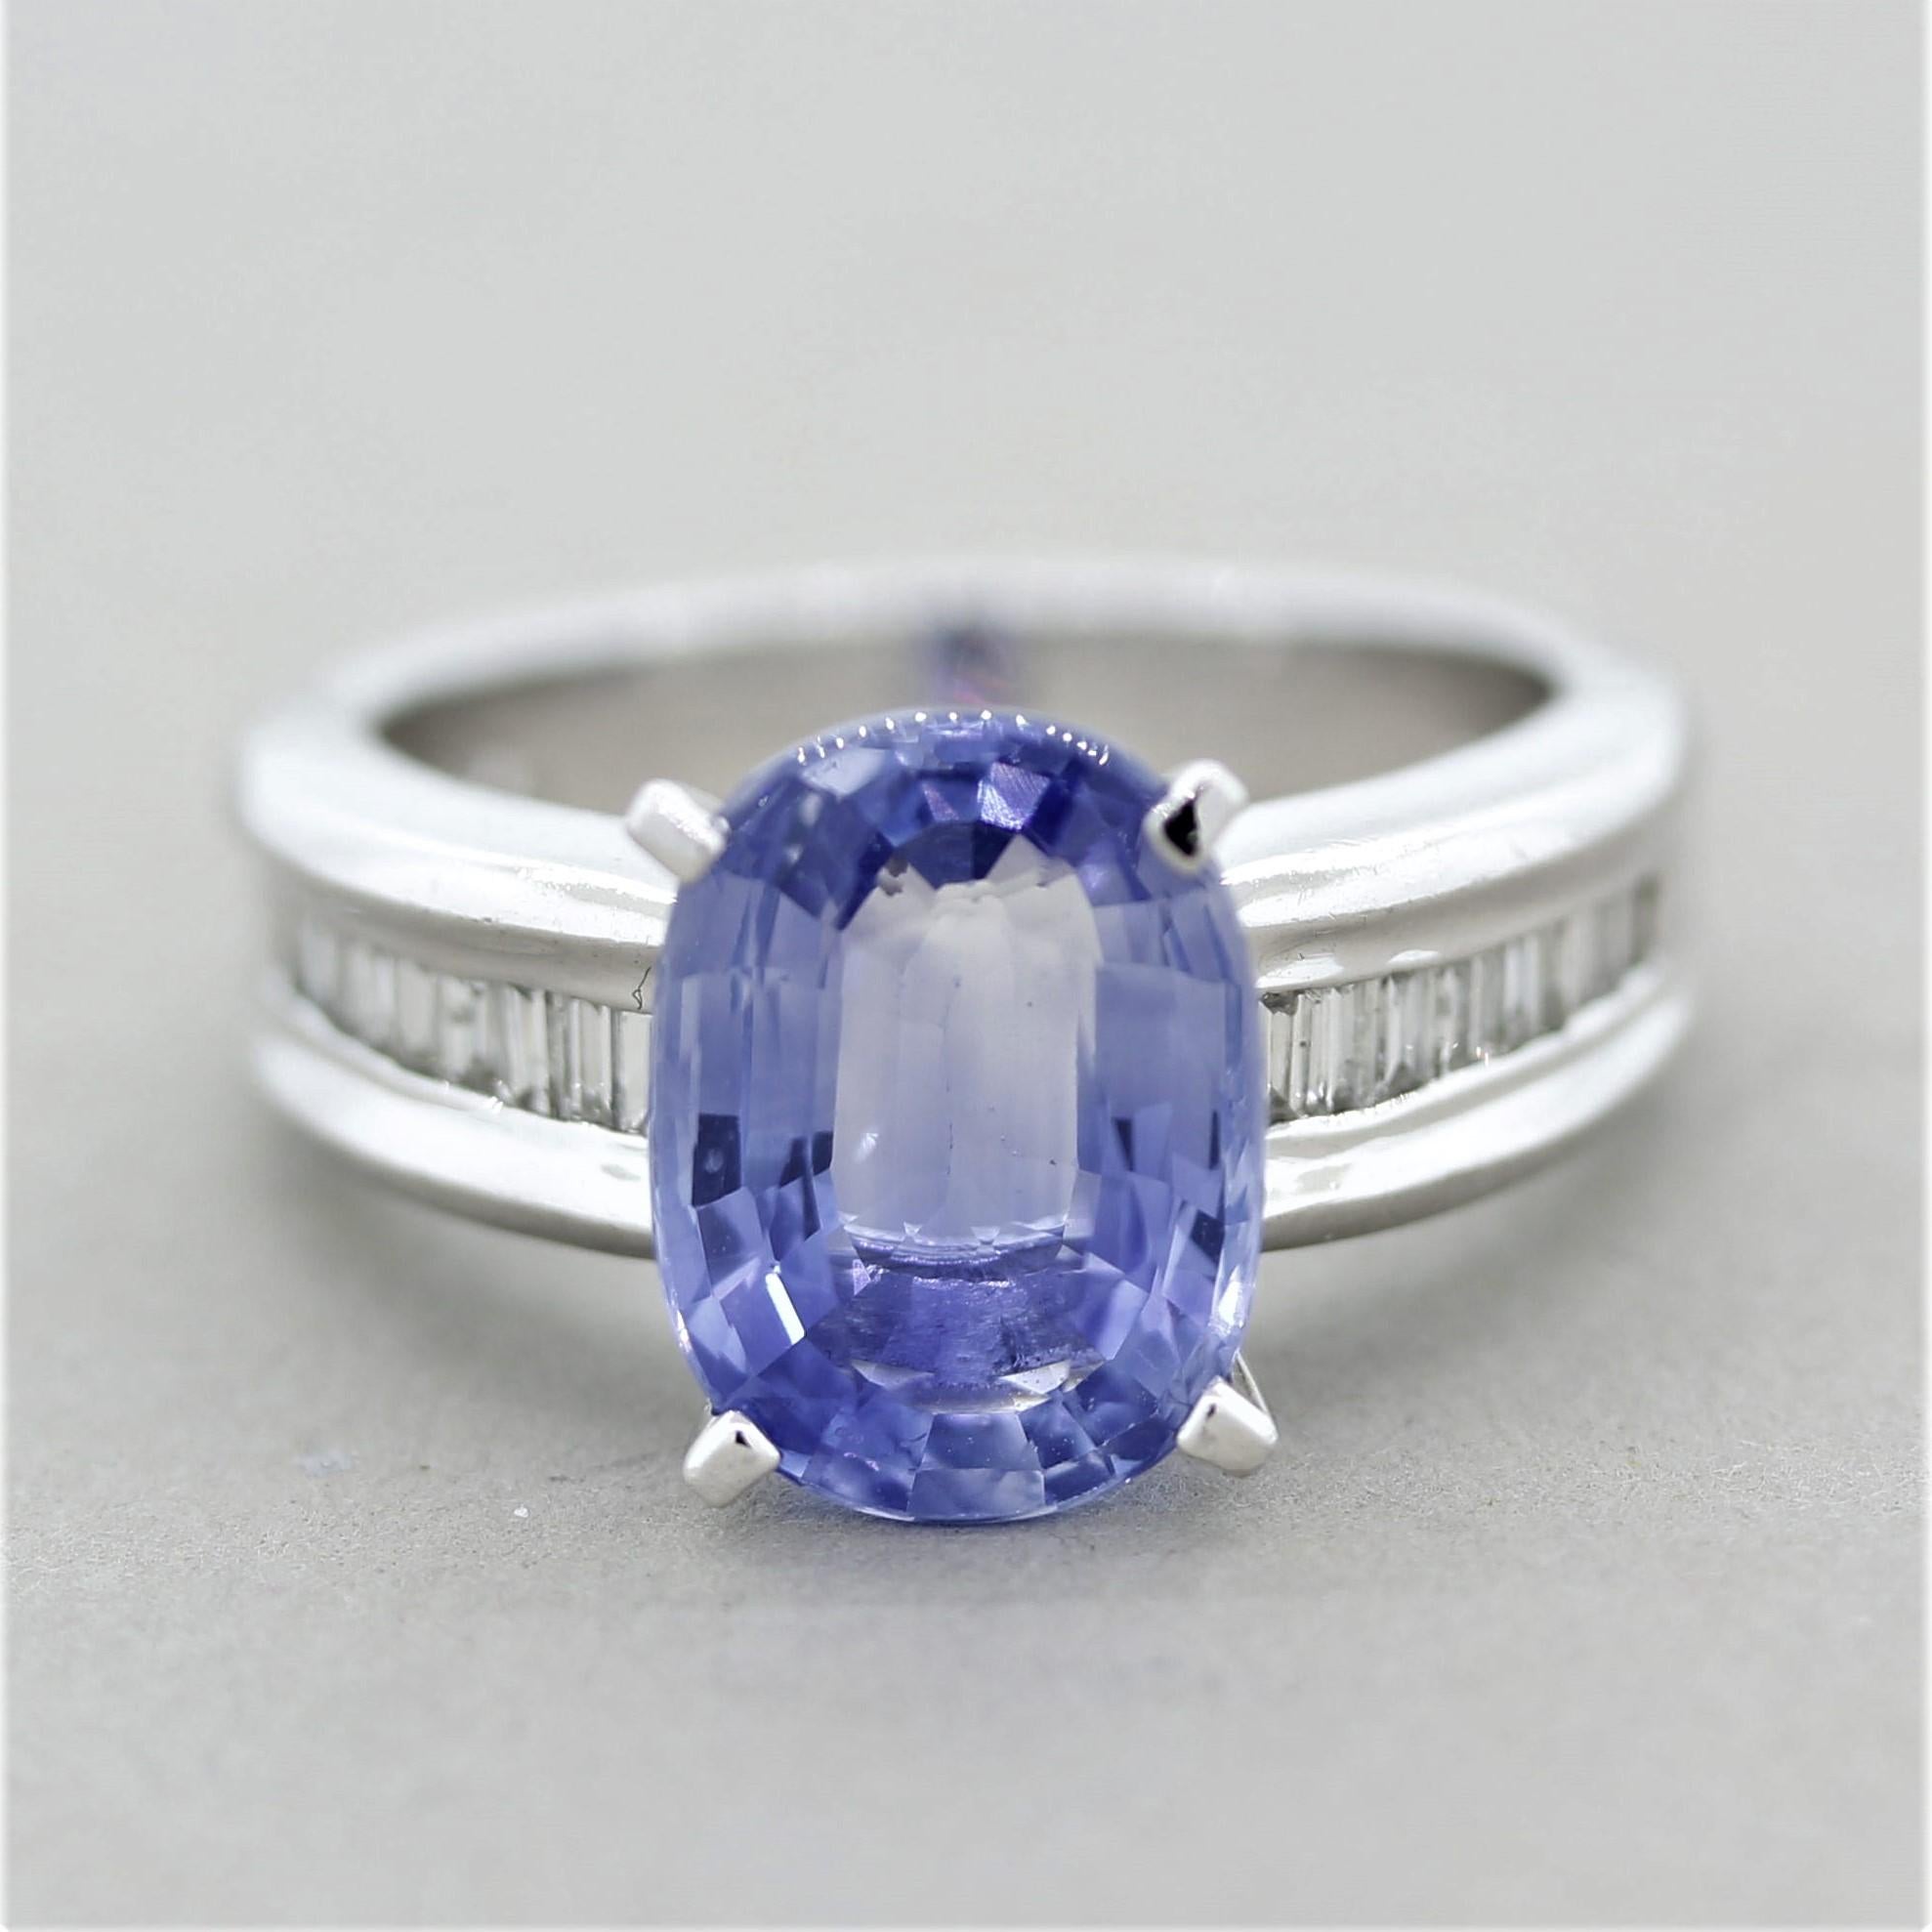 A simple yet elegant platinum ring featuring a 4.71 carat oval shaped blue sapphire with a light pleasing color. It is accented by 0.36 carats of baguette-cut diamonds. Hand-fabricated in platinum and ready to be worn!

Ring Size 6.75